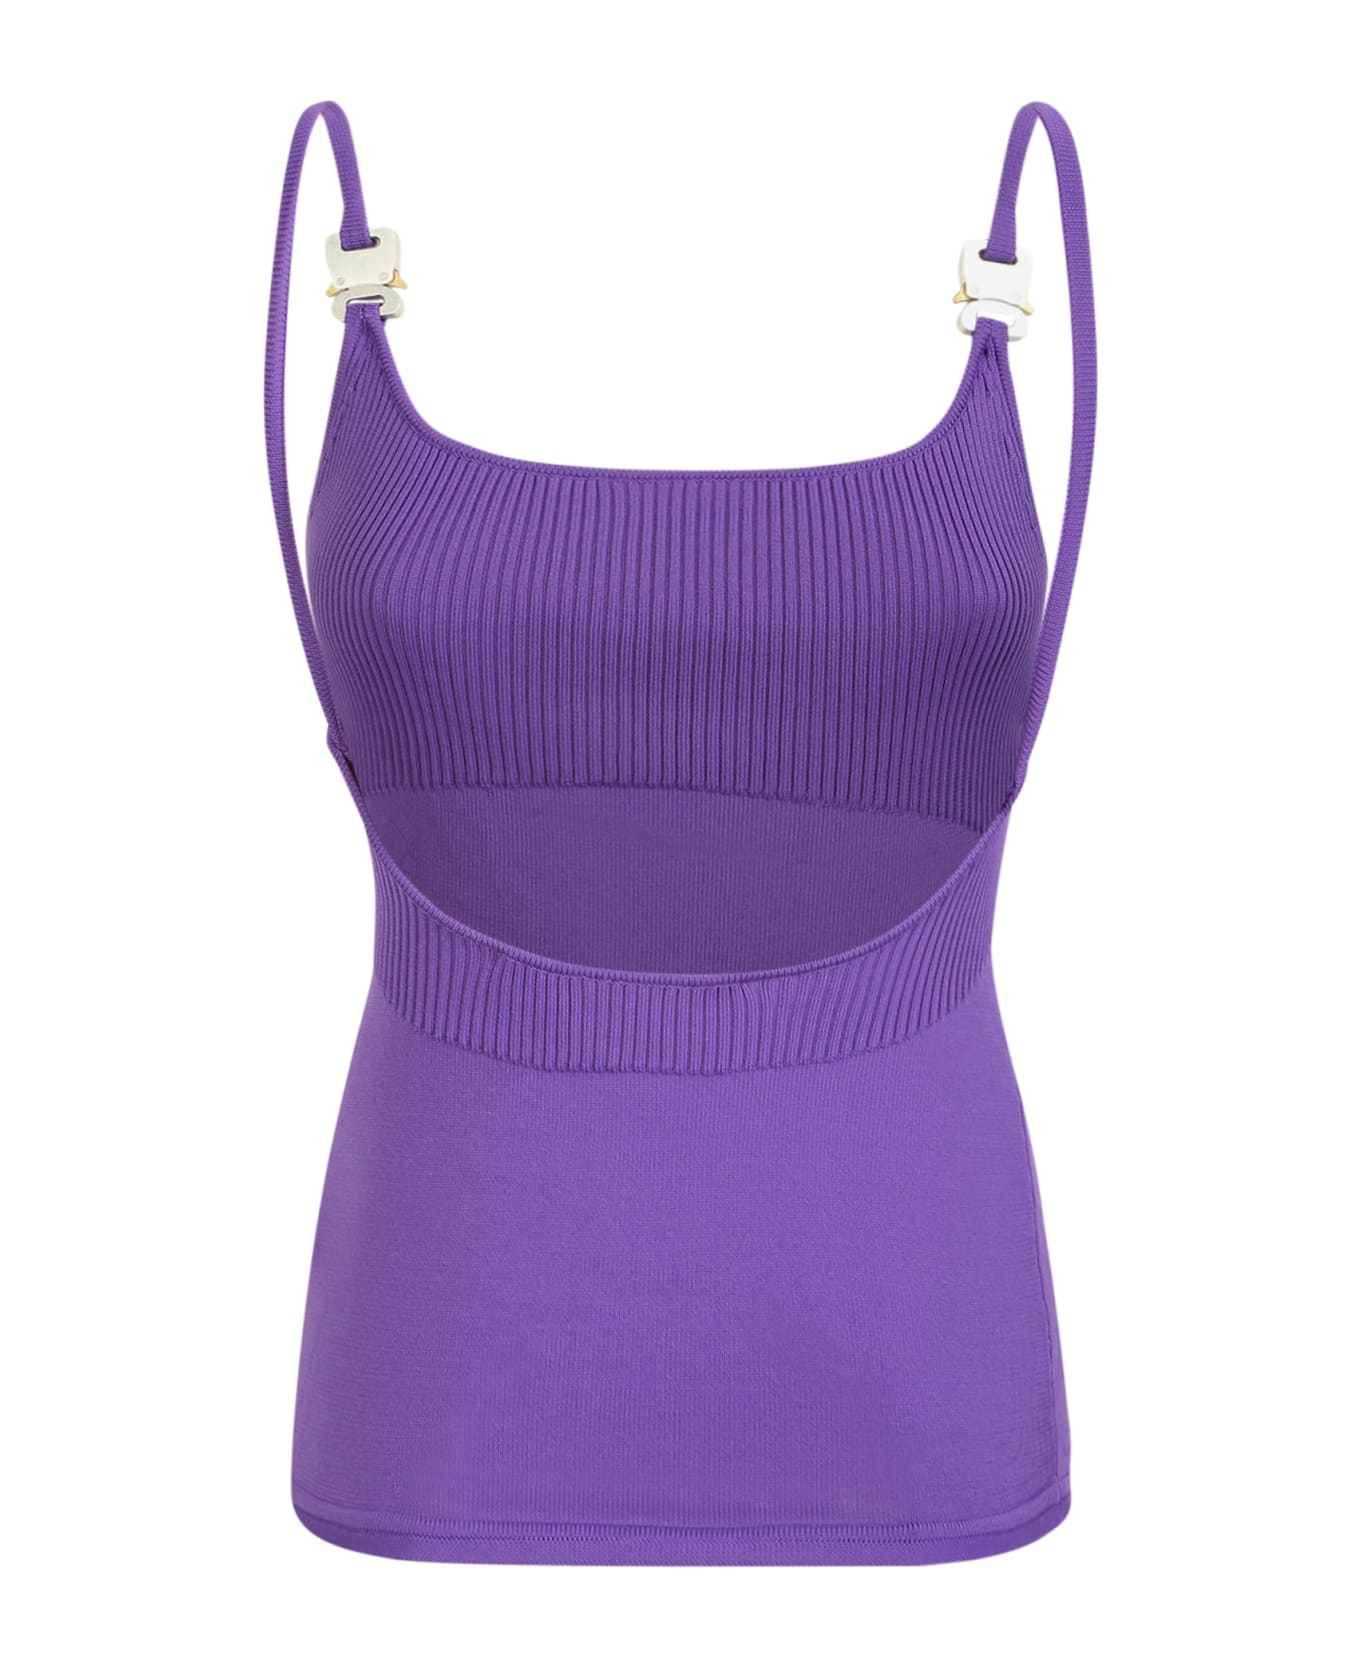 1017 ALYX 9SM Top With A Bold Hue And Understated Silhouette - Purple タンクトップ